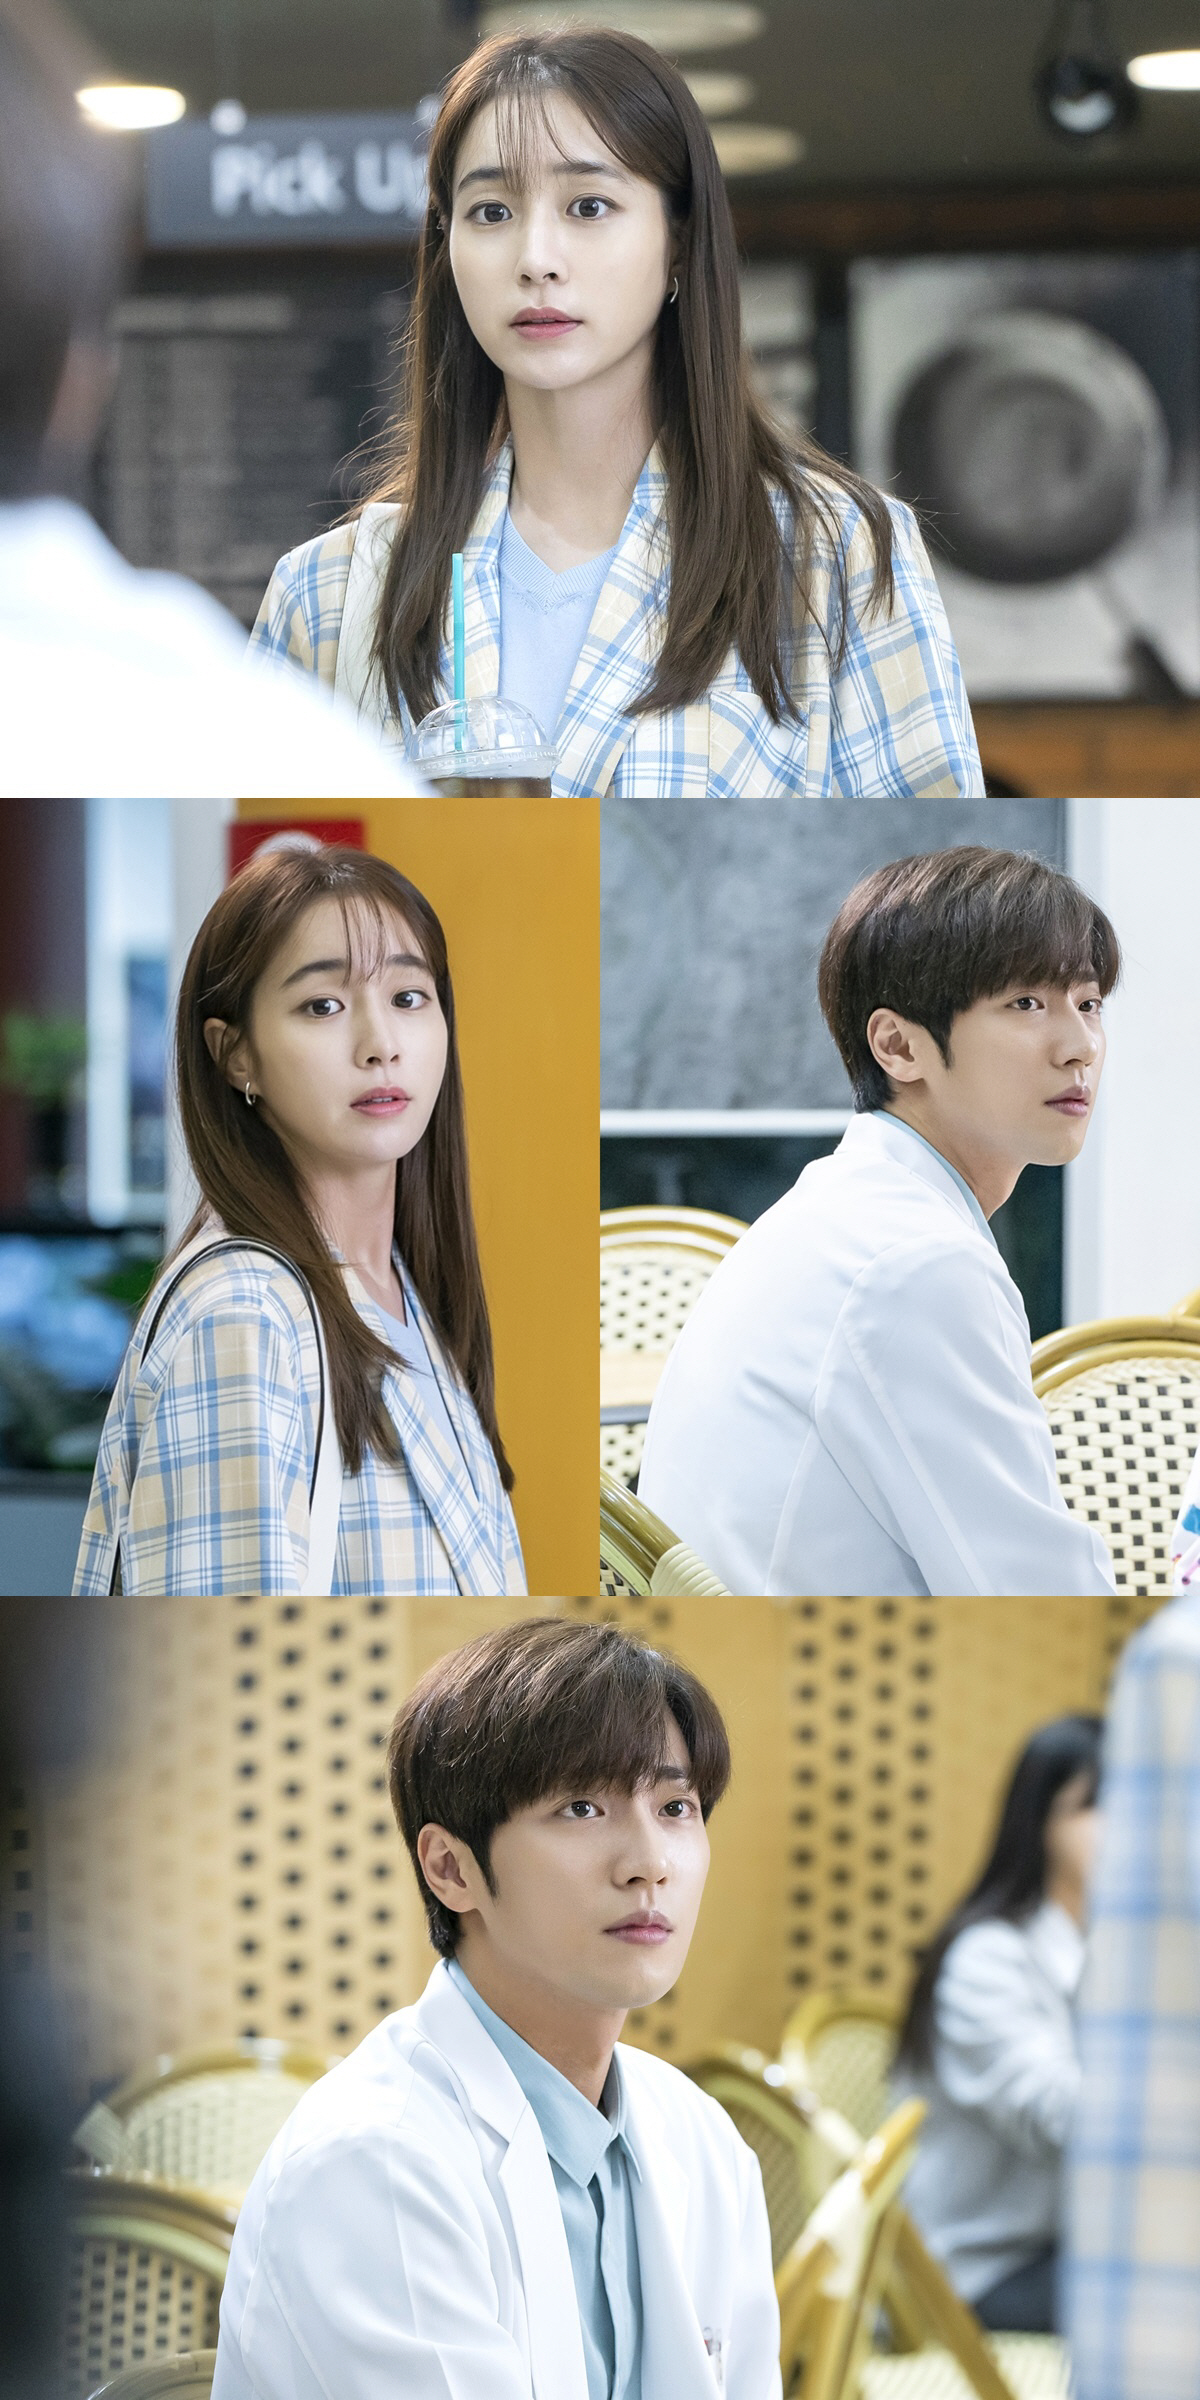 Why are Lee Min-jung and Lee Sang-yeob facing each other?In the KBS 2TV Weekend drama Ive Goed Once, Lee Min-jung (Song Na-hee) and Lee Sang-yeob (Yoon Kyu-Jin) who are suffering from endlessly shaking Feeling will bring a lot of affection to the house theater.Previously, the mind of Yoon Kyu-Jin (Lee Sang-yeob) toward Song Na-hee (Lee Min-jung) was revealed in a secret way.After the child abuse incident, Song Na-hee and Lee Jung-rok showed a bitterness. He also handed a new wallet and said, It is good to change it once.I feel like Im starting a new one. Instead of Yoo Bo-young, I made Choices the wallet given by Song Na-hee in the past, making the future story more unpredictableAmong them, the photos show the hearts of those who see Song Na-hee and Yoon Kyu-Jin facing each other in a frozen atmosphere.I feel the danger of not knowing why I see the two people facing each other with a hard look.In addition, Song Na-hee, who is making a meaningful expression with coffee in his hand, is filled with a shaking mind, which raises curiosity about what happened to her.On this day, Song Na-hee makes a firm decision to organize his shaking Feeling.I am anxiously waiting for what kind of Choices she will do and what will lead to the future of their minds.Lee Min-jung and Lee Sang-yeob, who are shaken by the uncontrollable Feeling, can be seen in KBS 2TV Weekend drama Ive Goed Once, which is broadcasted every Saturday and Sunday at 7:55 pm.